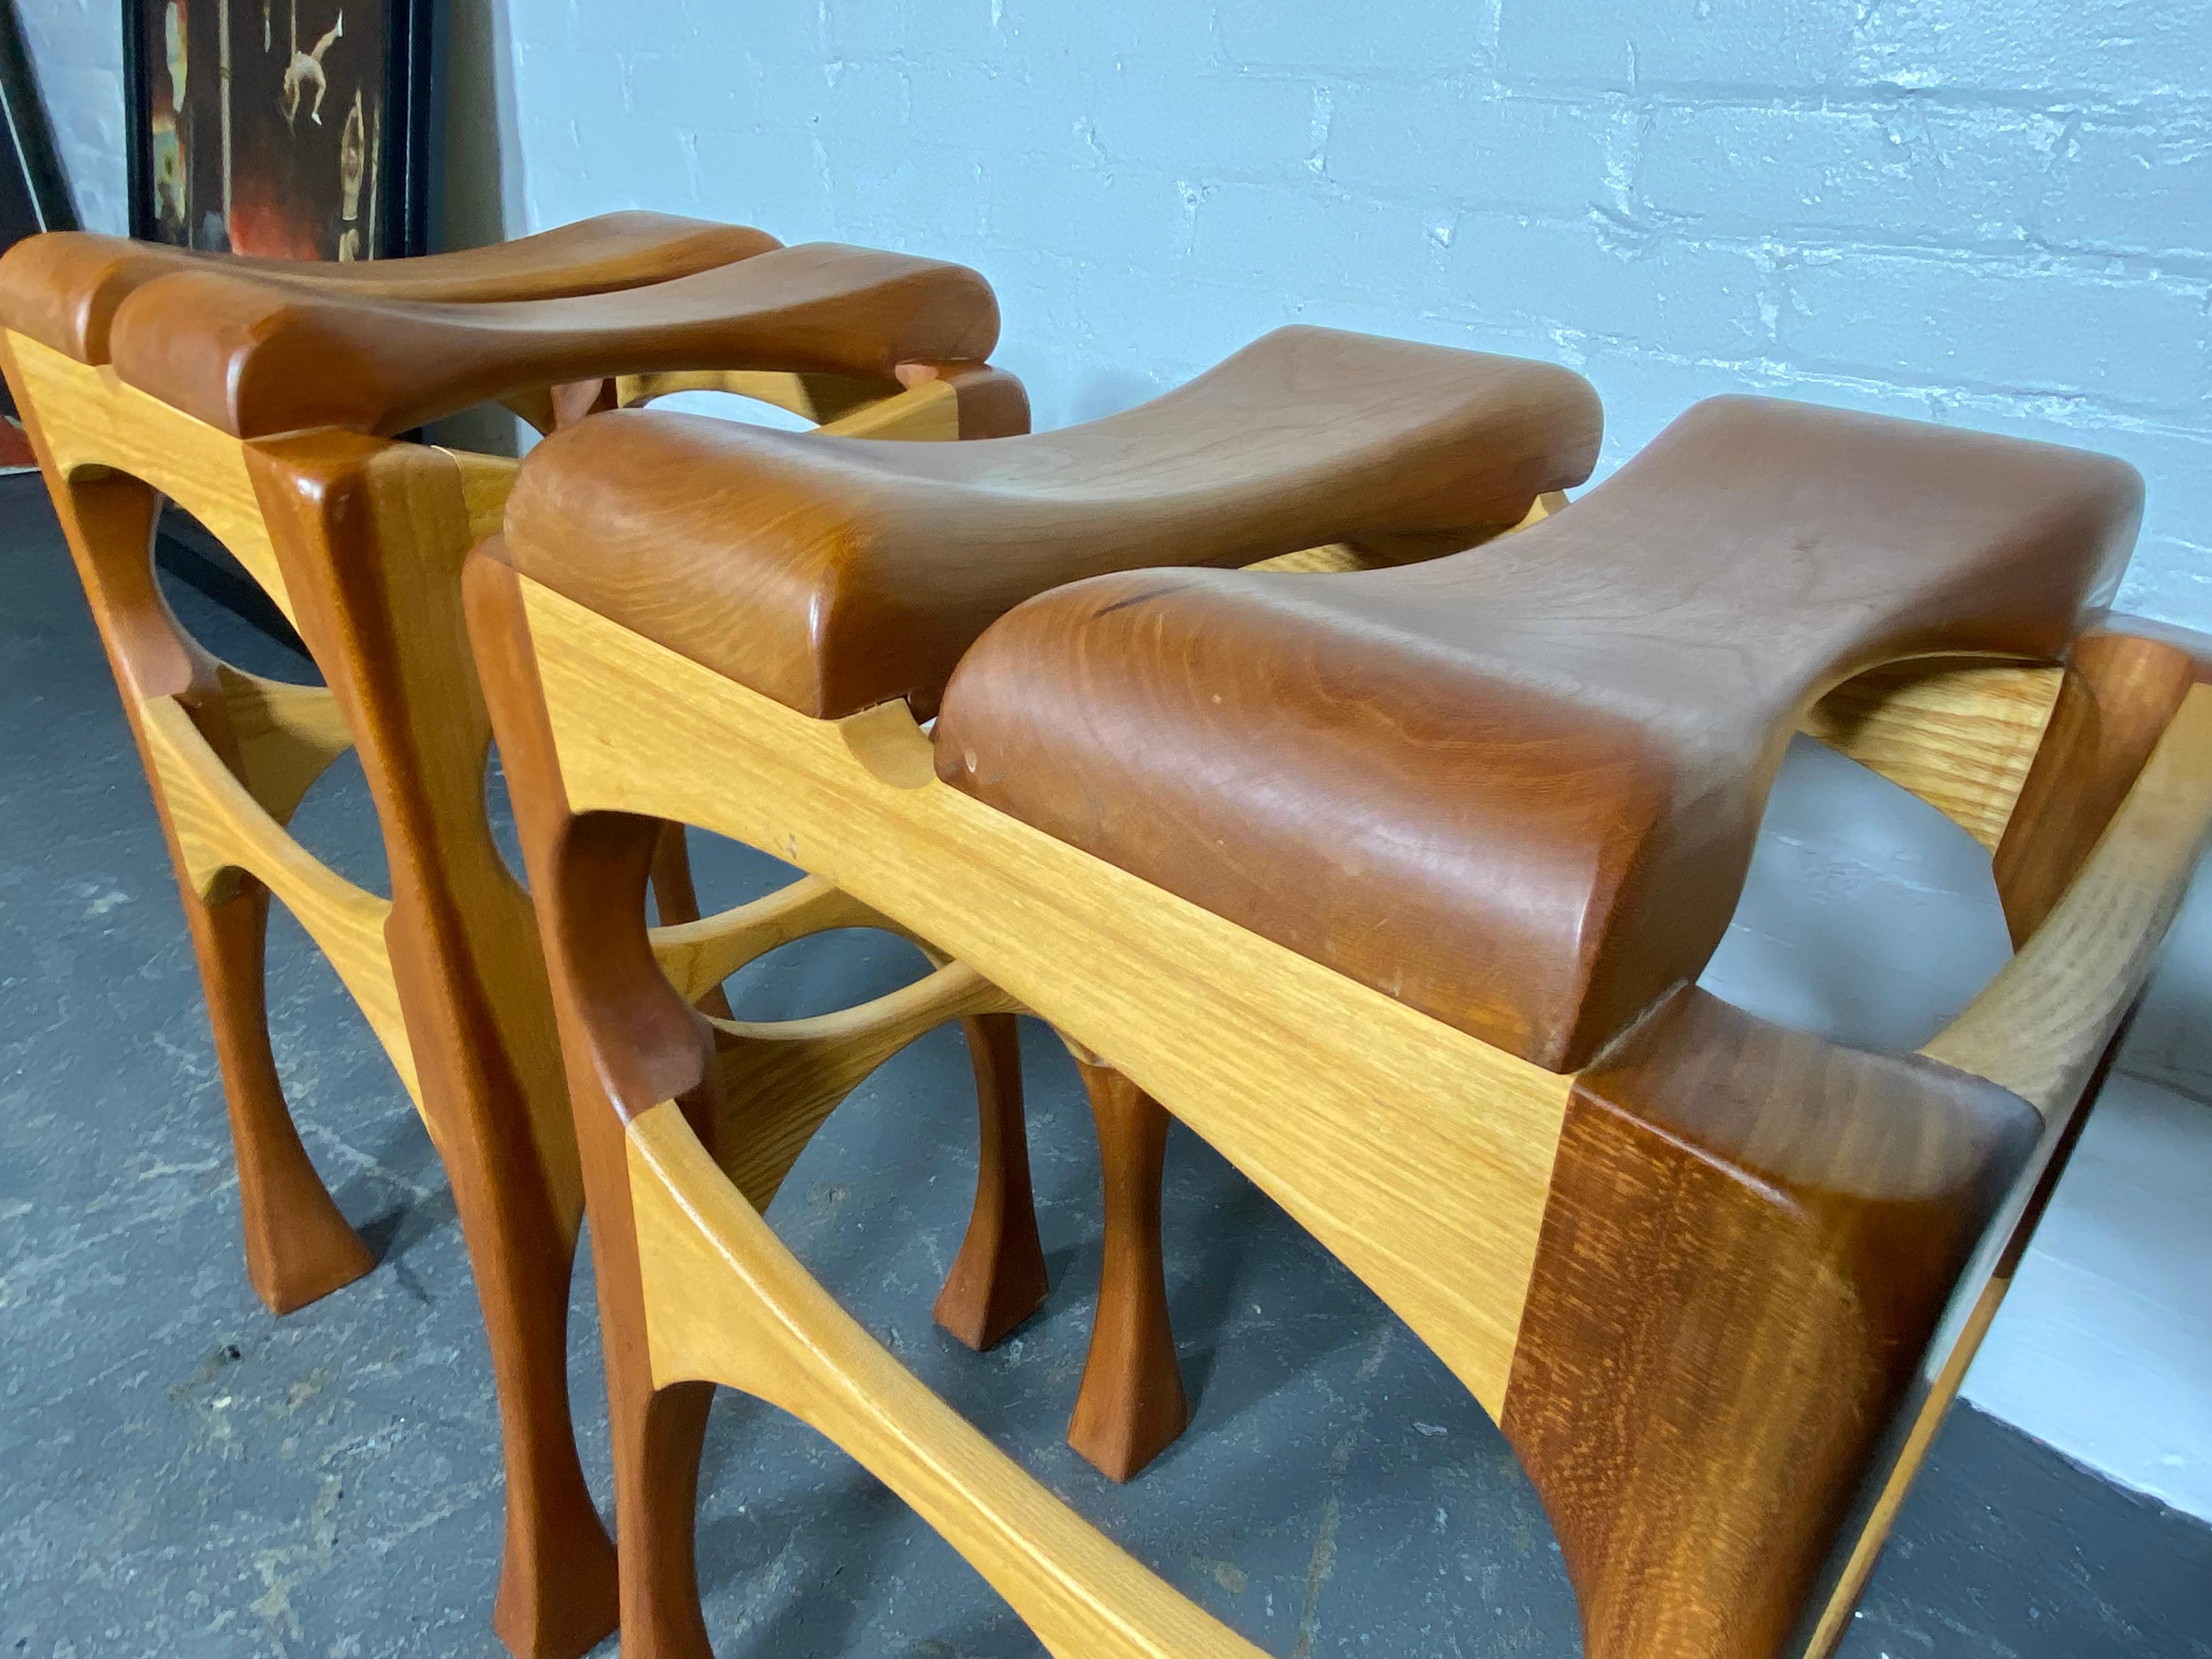 American Hand Crafted Bespoke Workshop/Studio Stools.  2-tone birch and cherry  For Sale